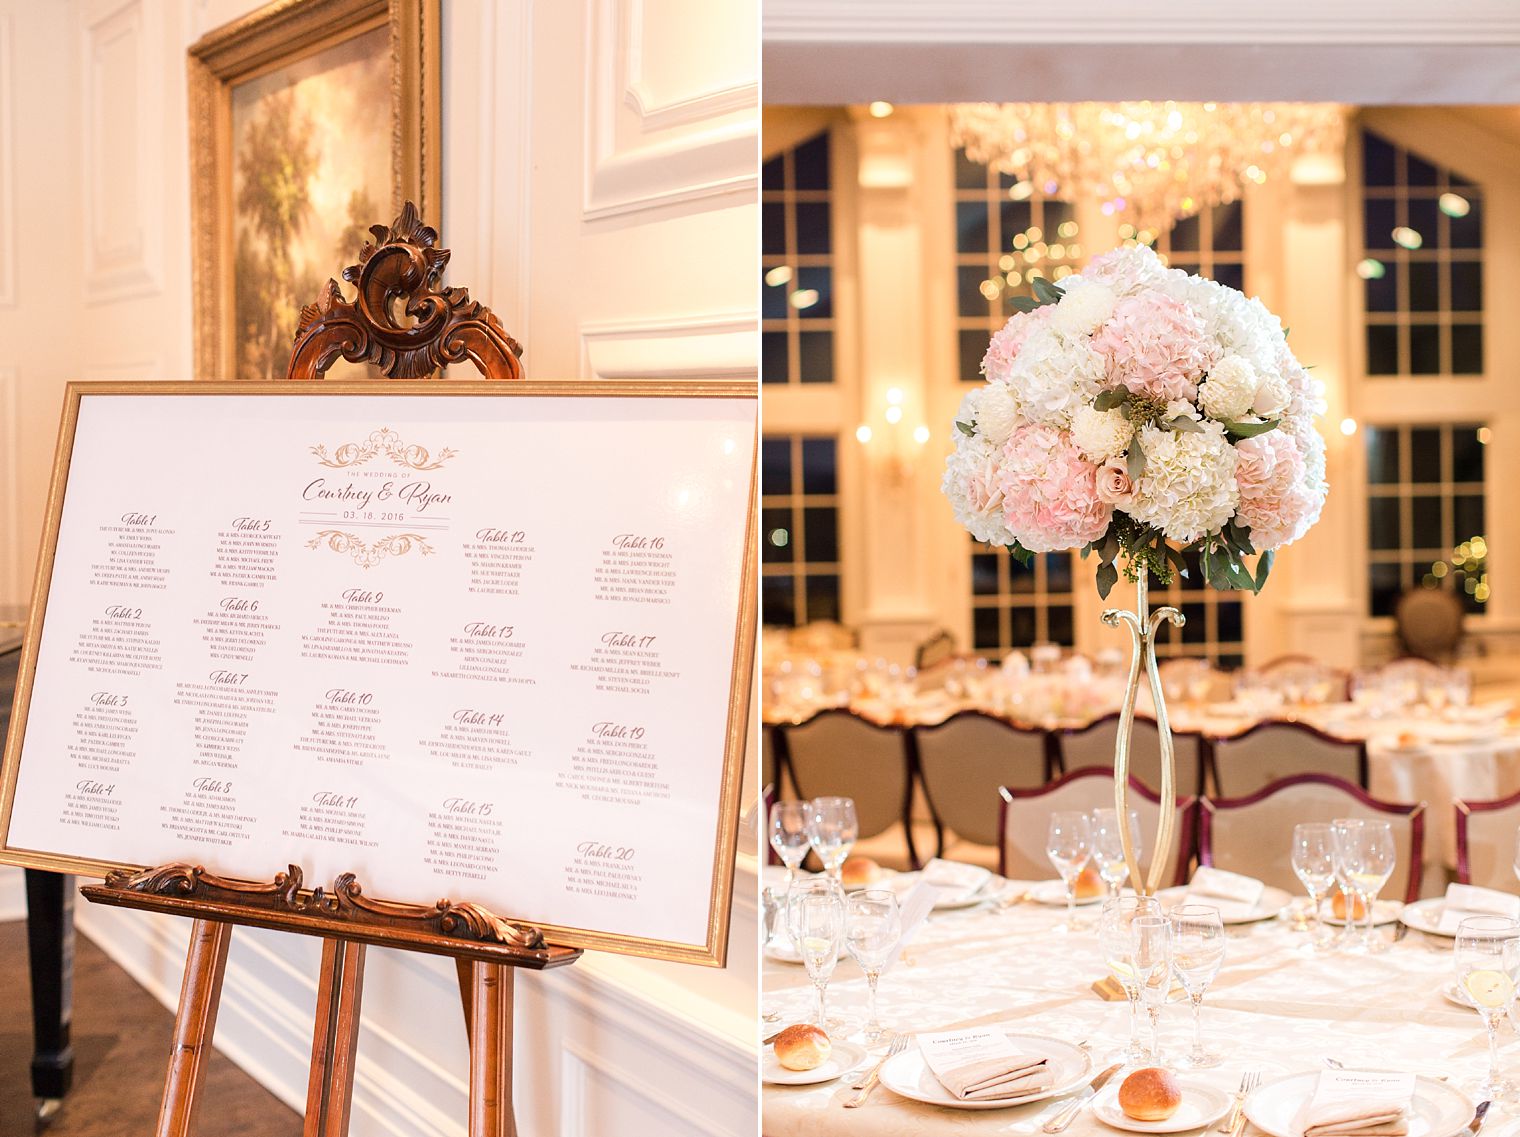 Seating board and centerpieces